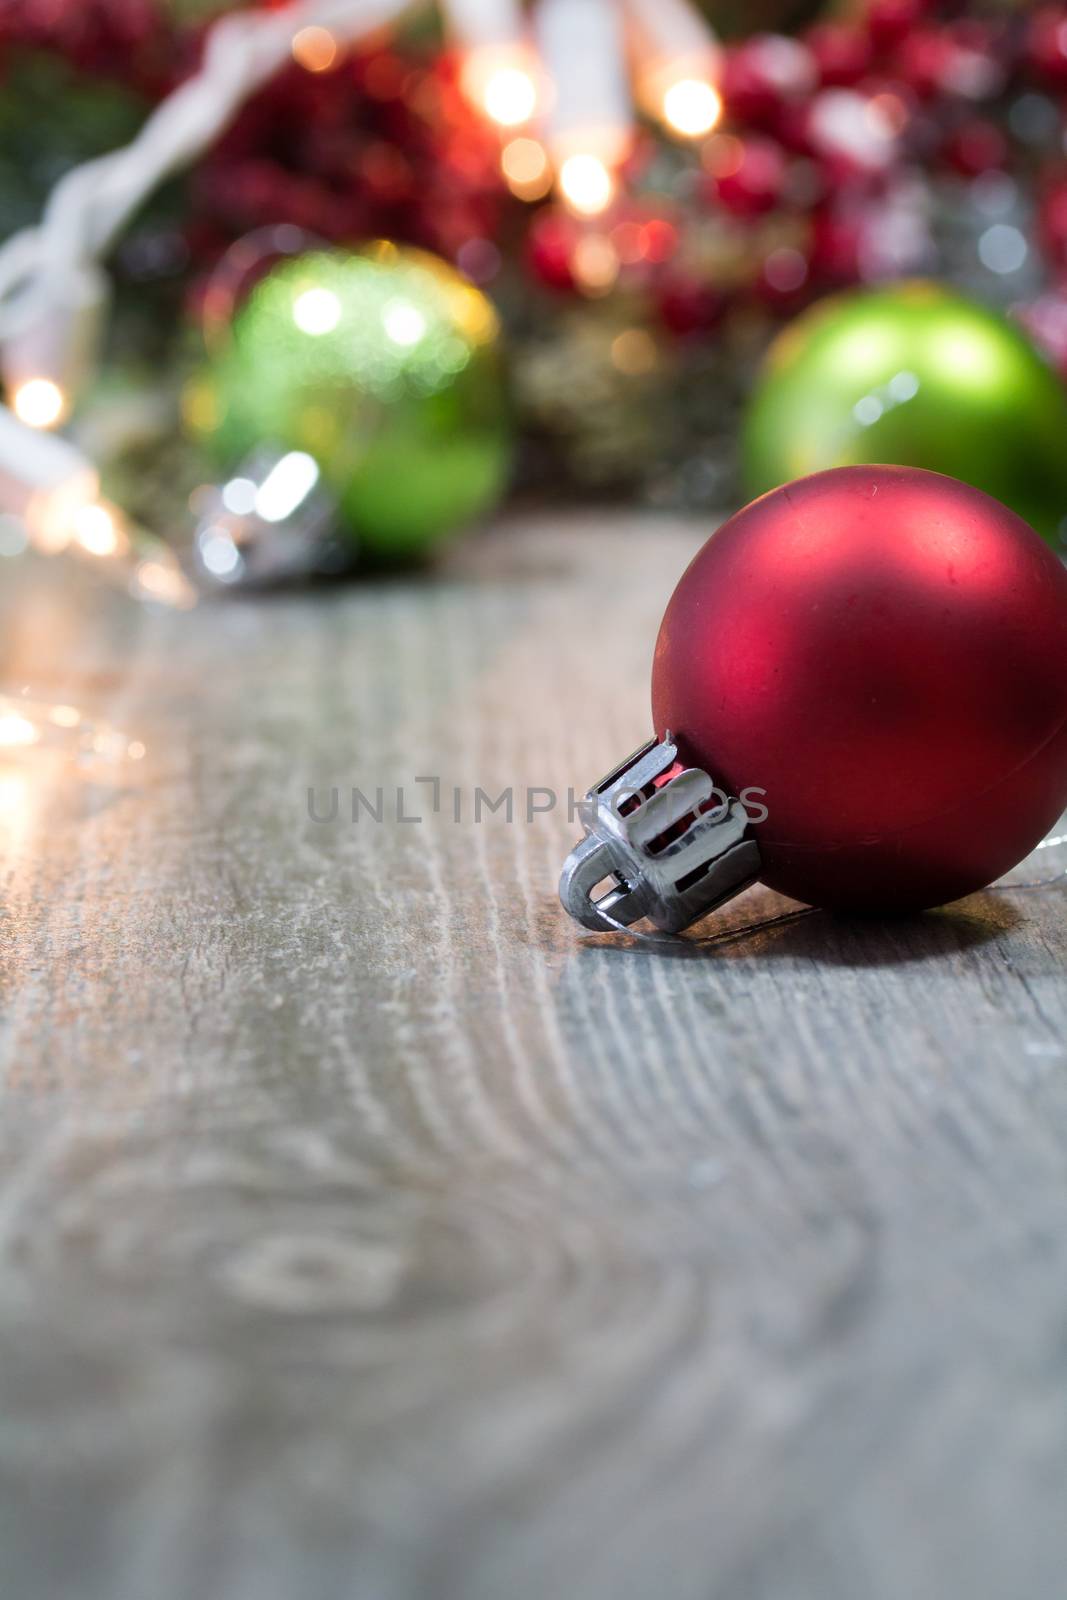 Christmas decorations and ornaments on a wooden background.